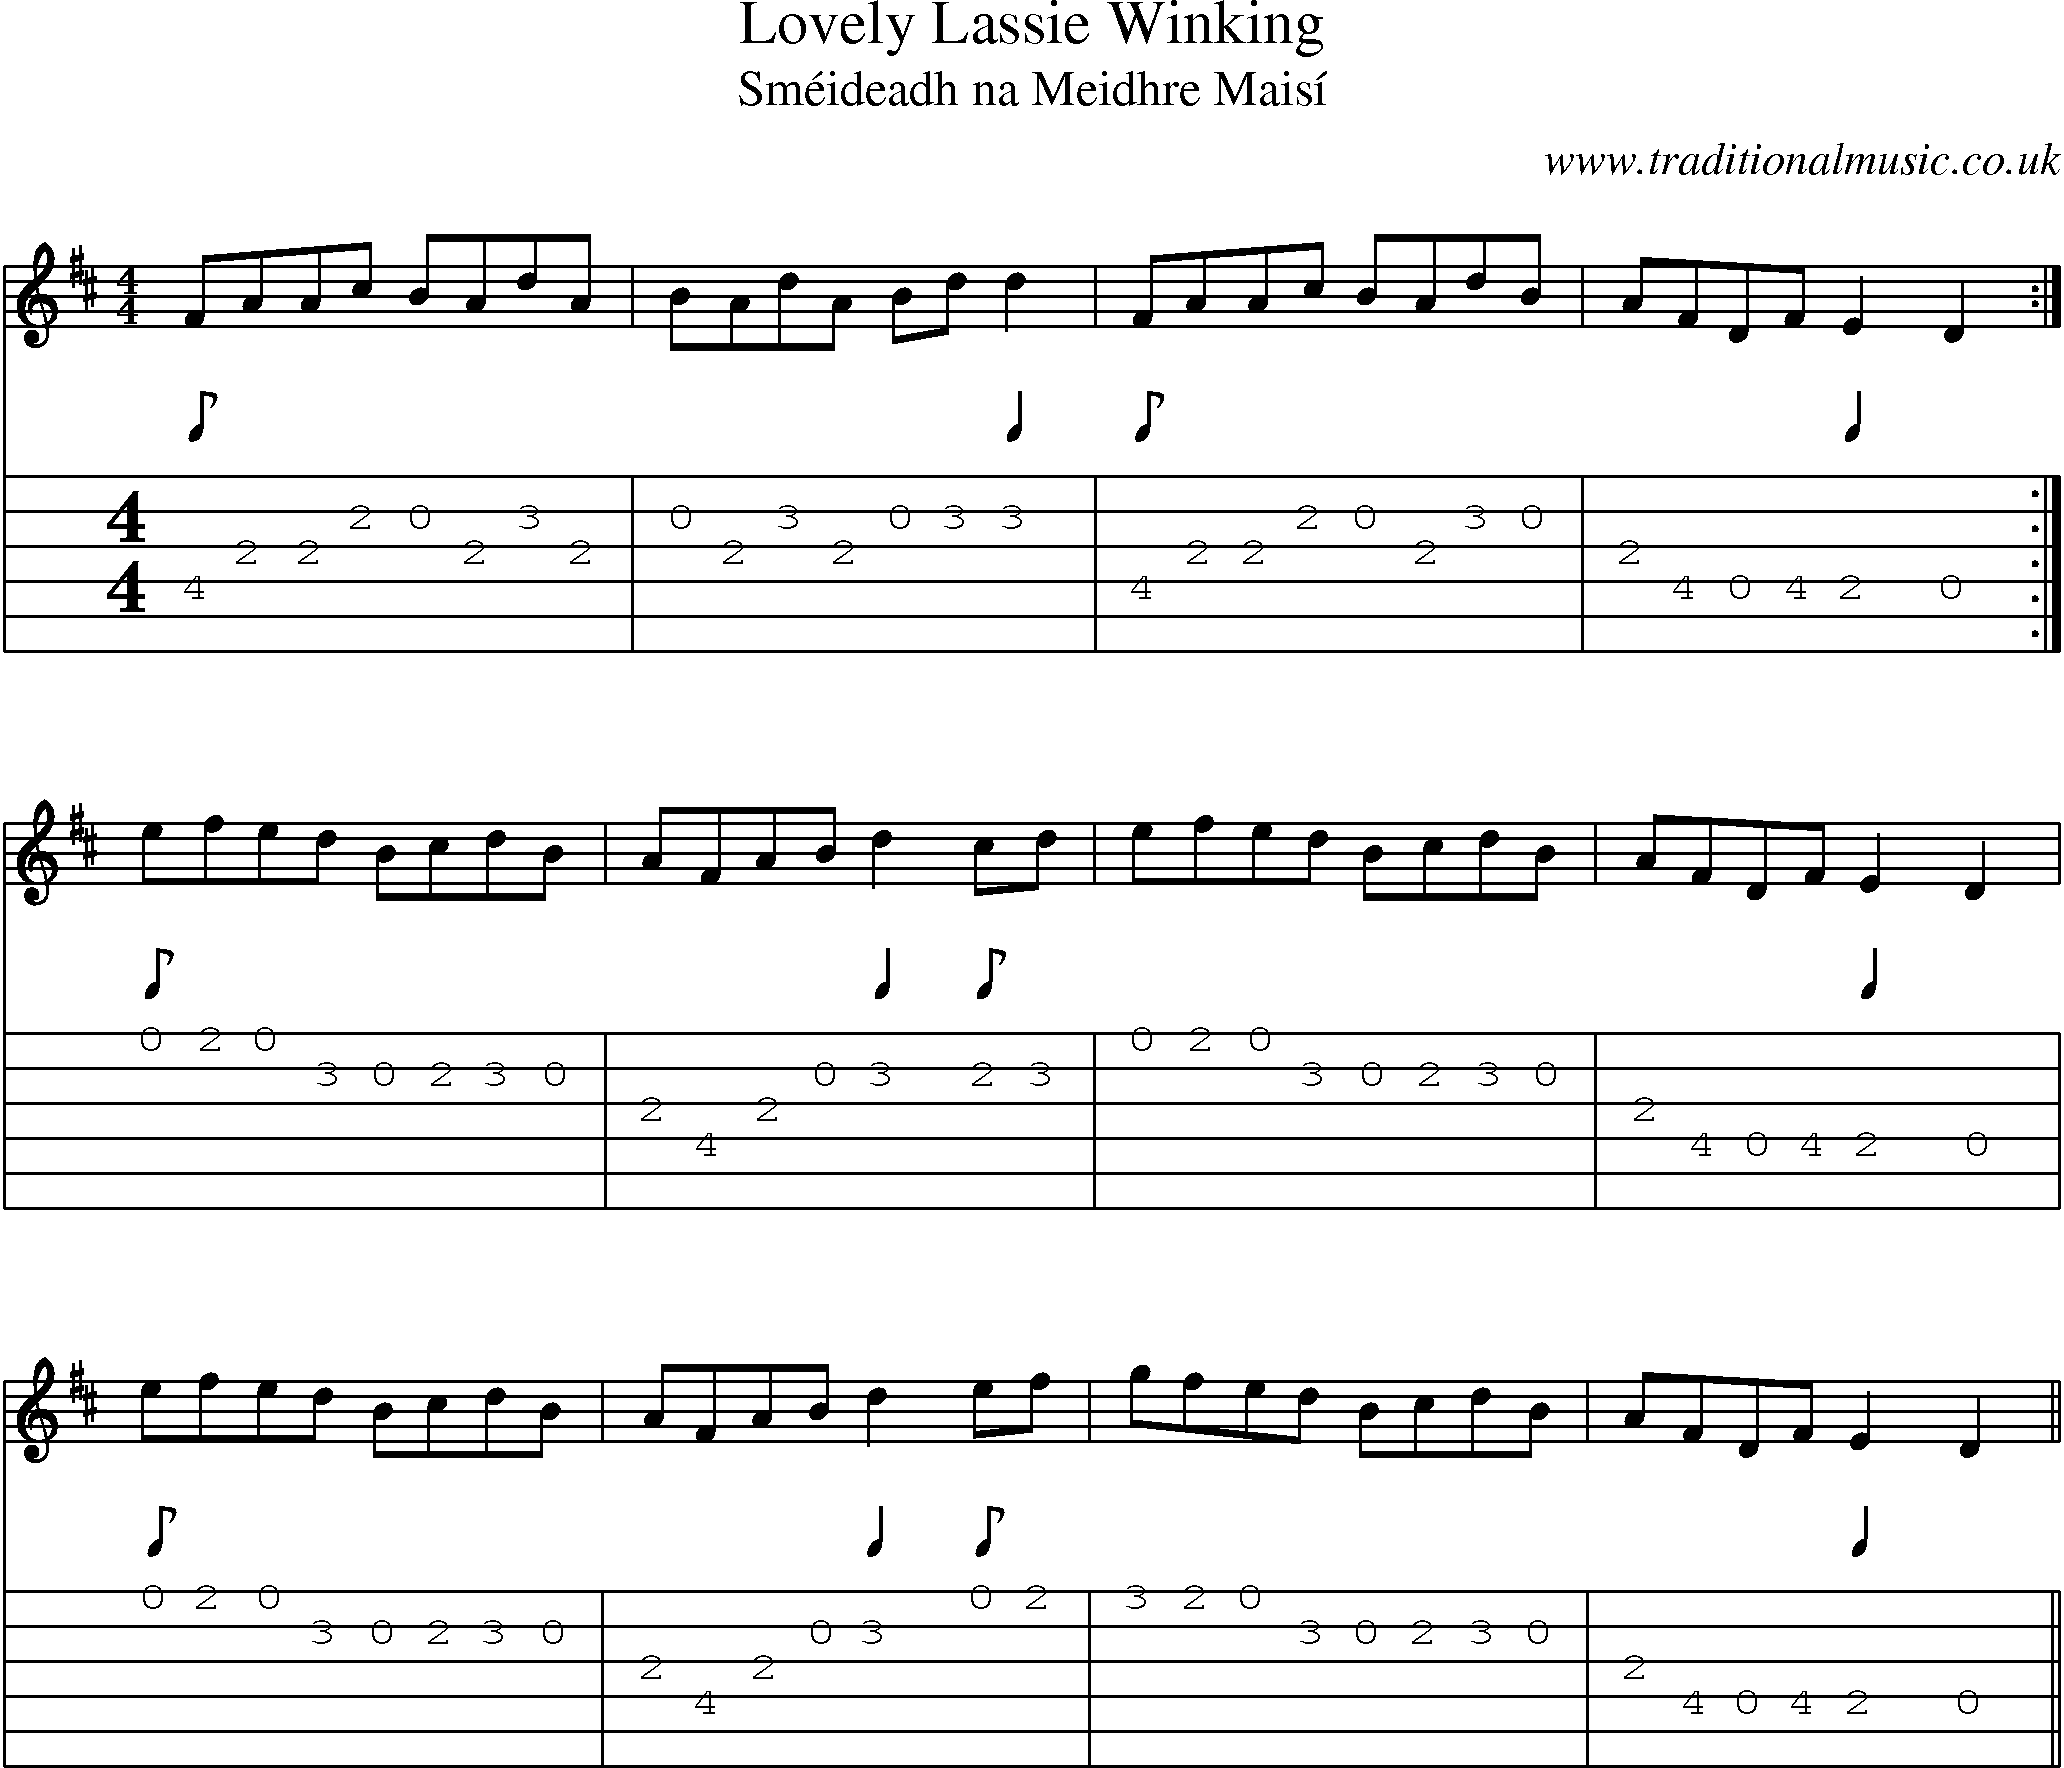 Music Score and Guitar Tabs for Lovely Lassie Winking